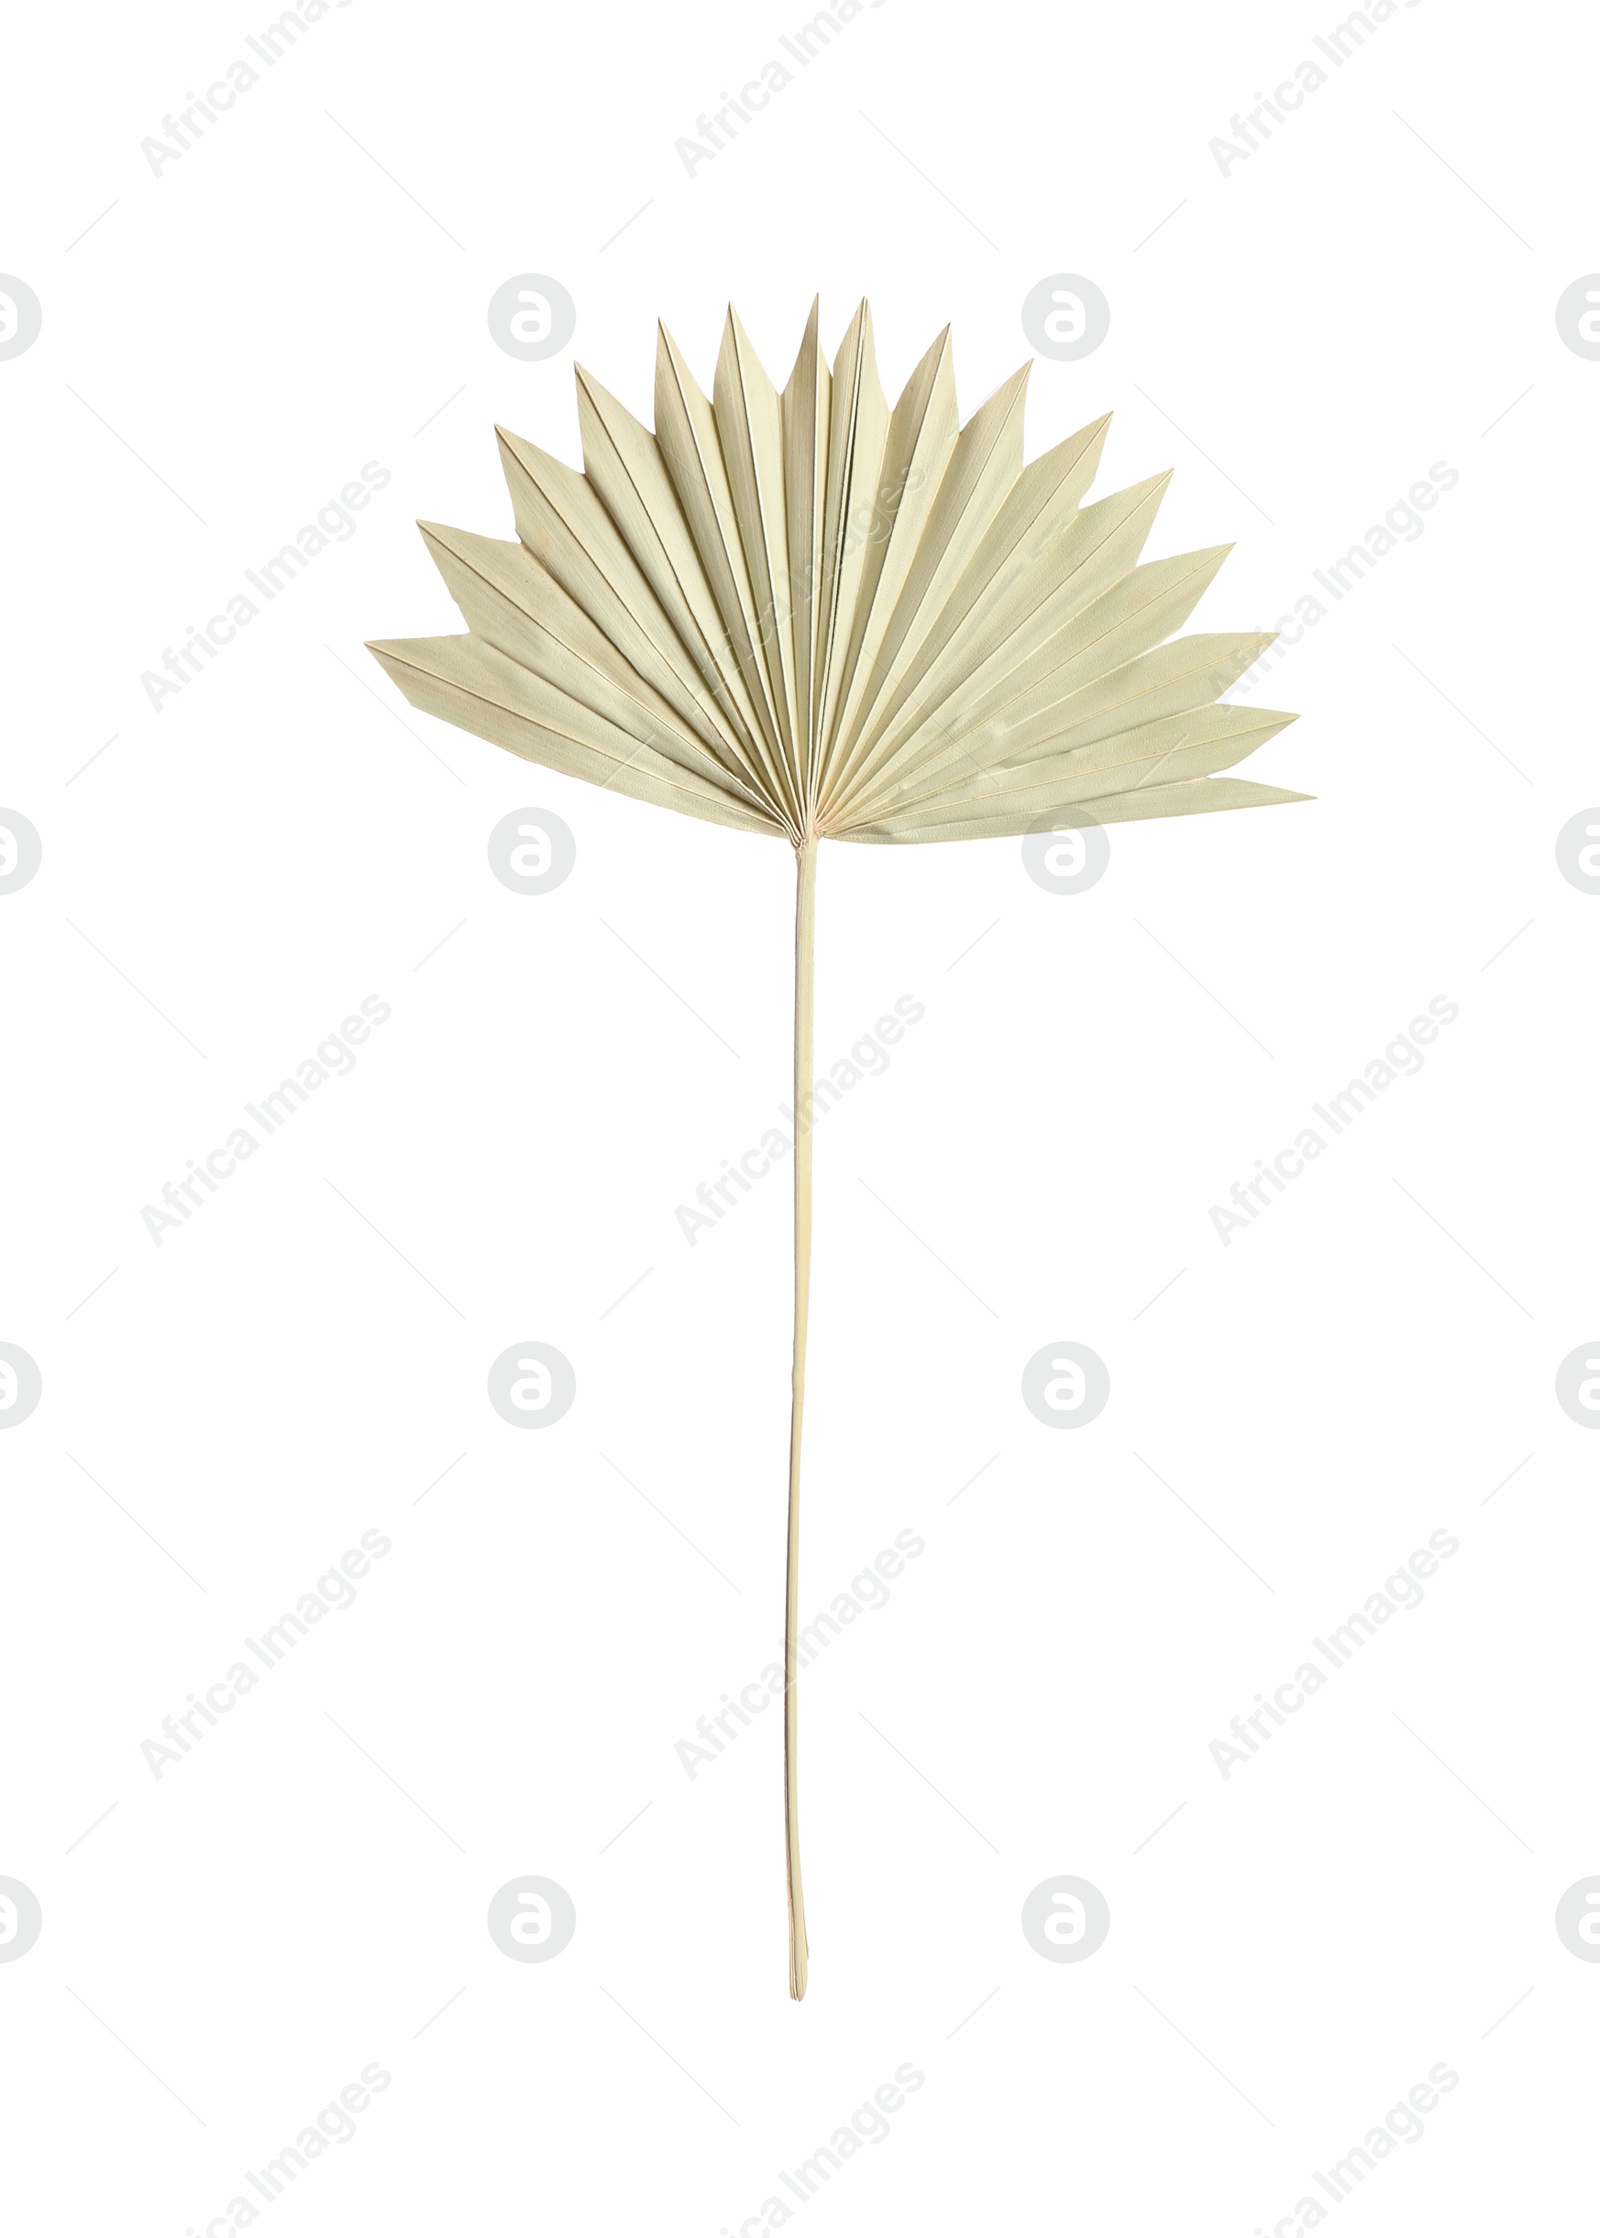 Photo of Dry leaf of fan palm tree isolated on white